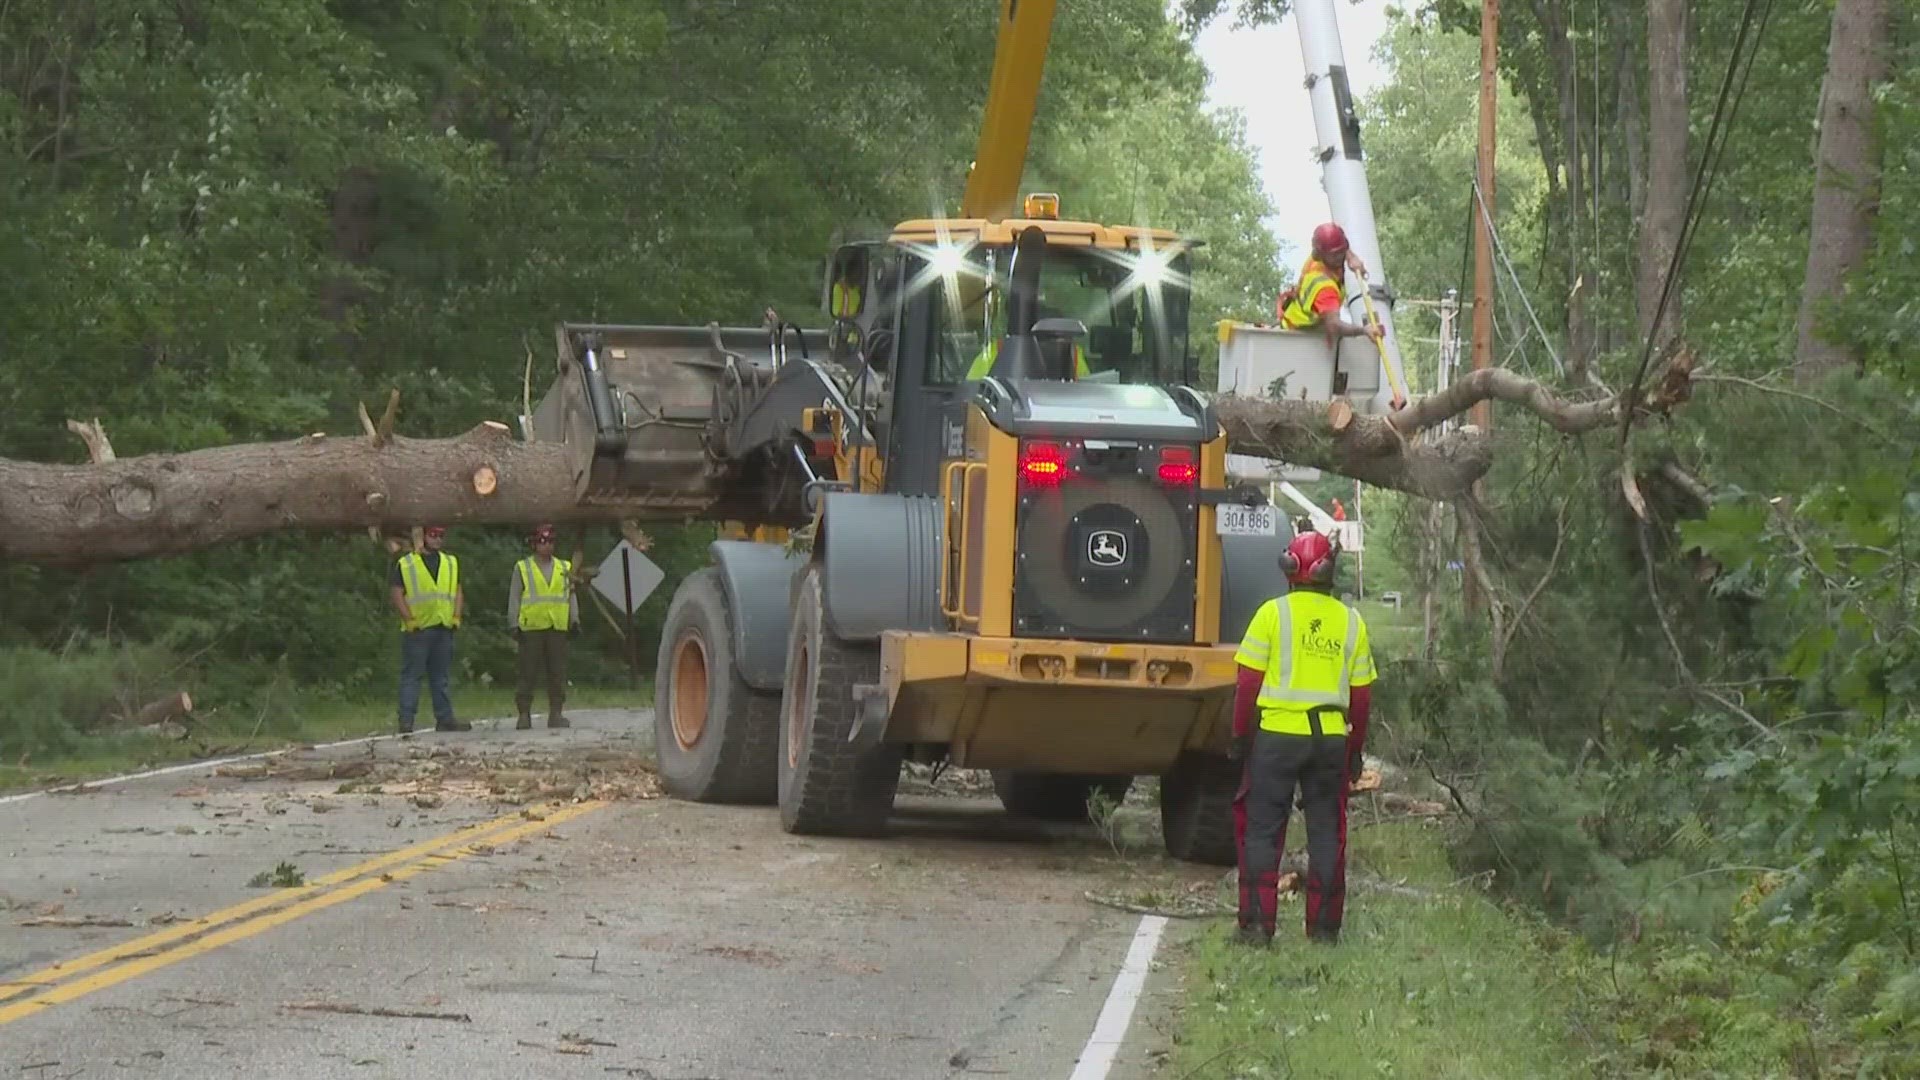 Crews from Ontario helped Central Maine Power restore power and remove debris from downed trees in Scarborough.